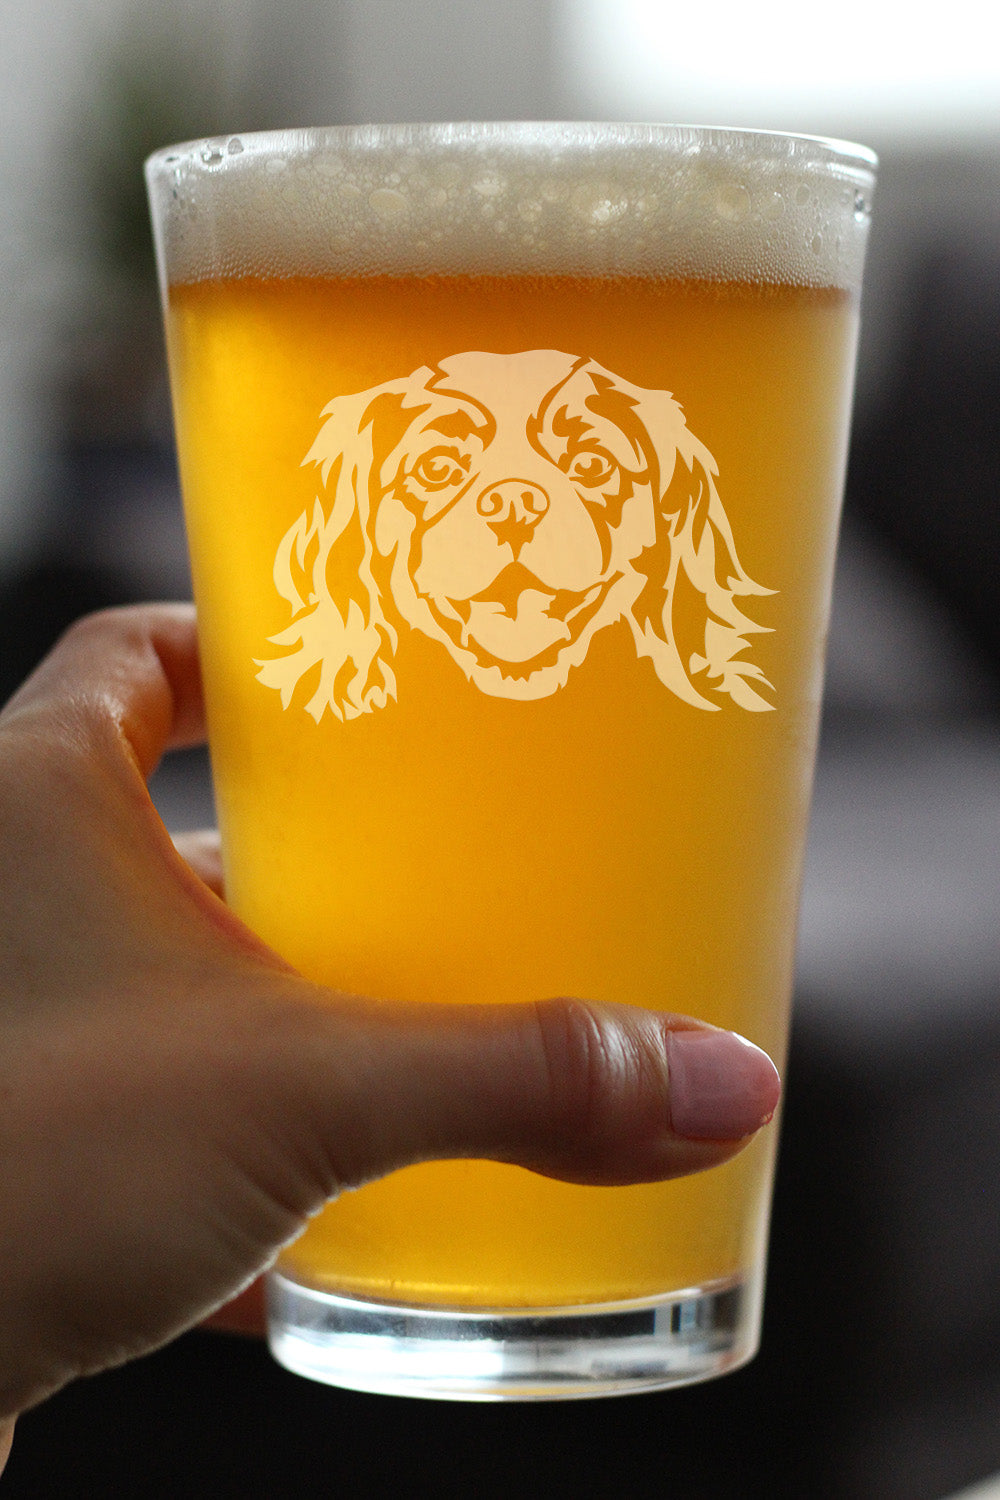 Cavalier King Charles Spaniel Face Pint Glass for Beer - Unique Dog Themed Decor and Gifts for Moms &amp; Dads of Cavaliers - 16 Oz